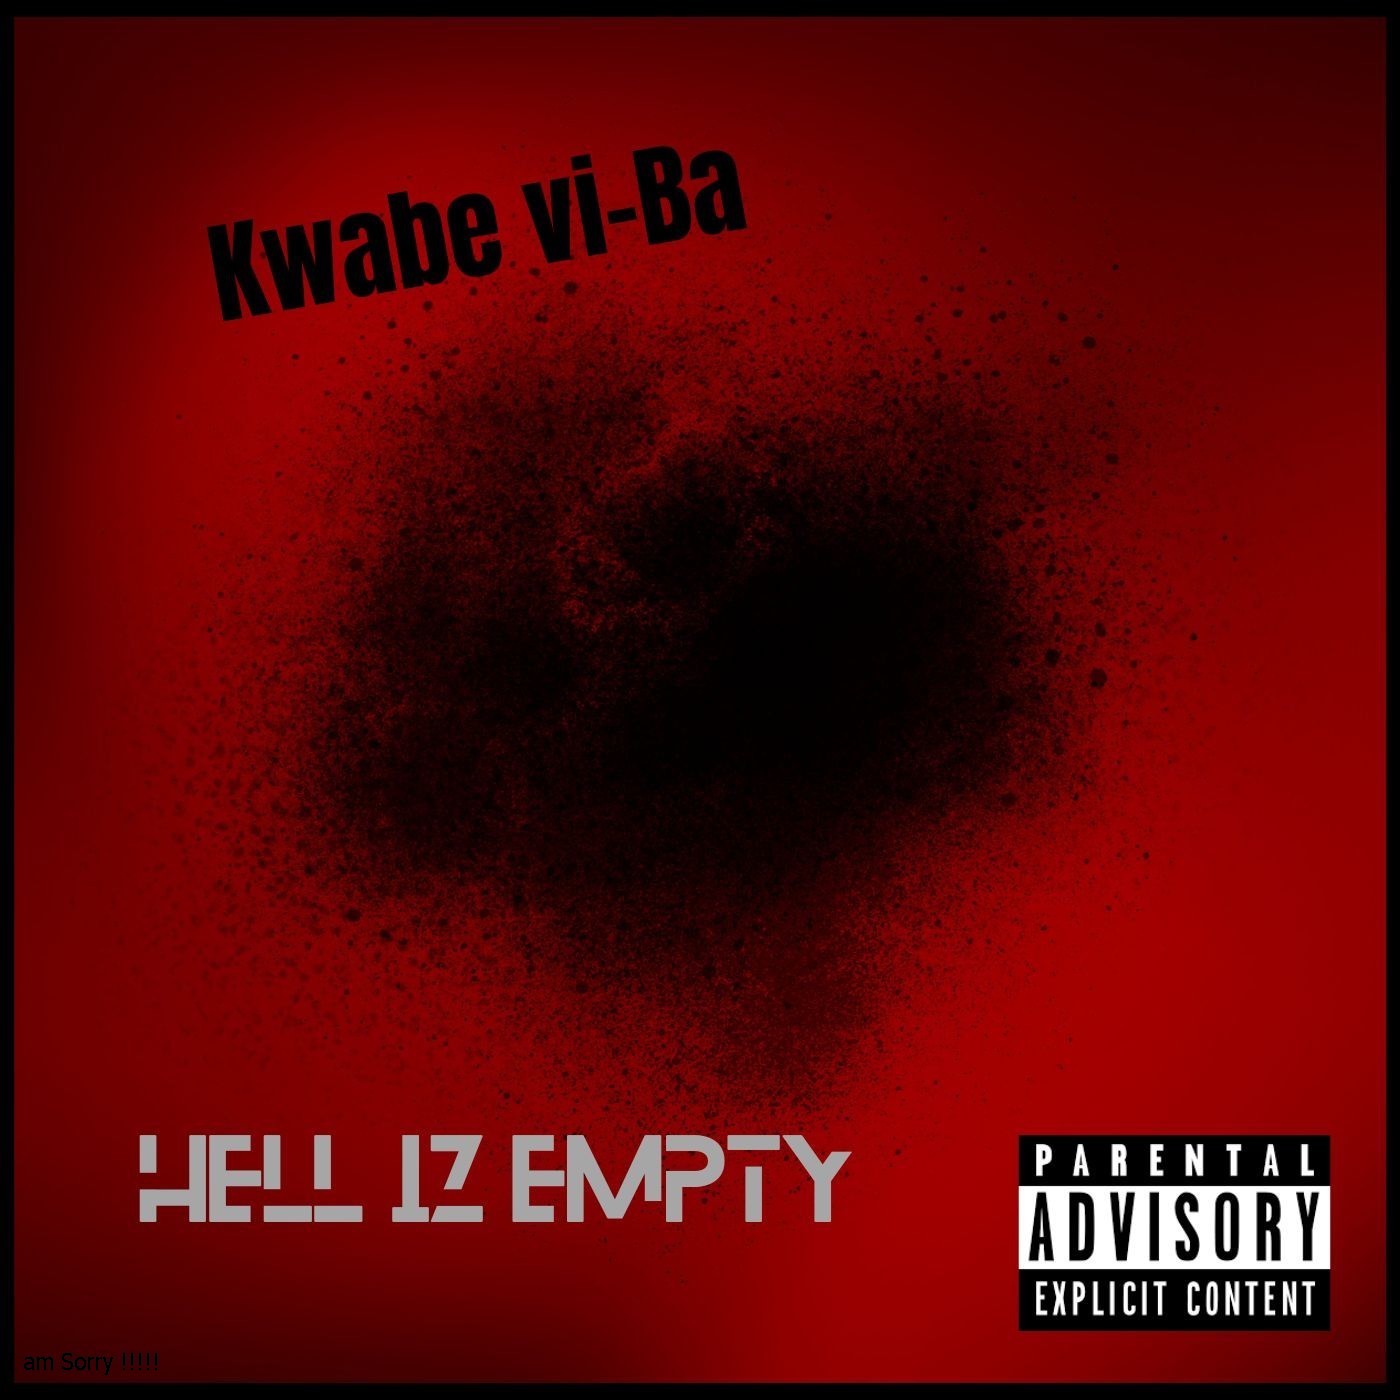 Kwabe Vi-Ba - Hell Is Empty